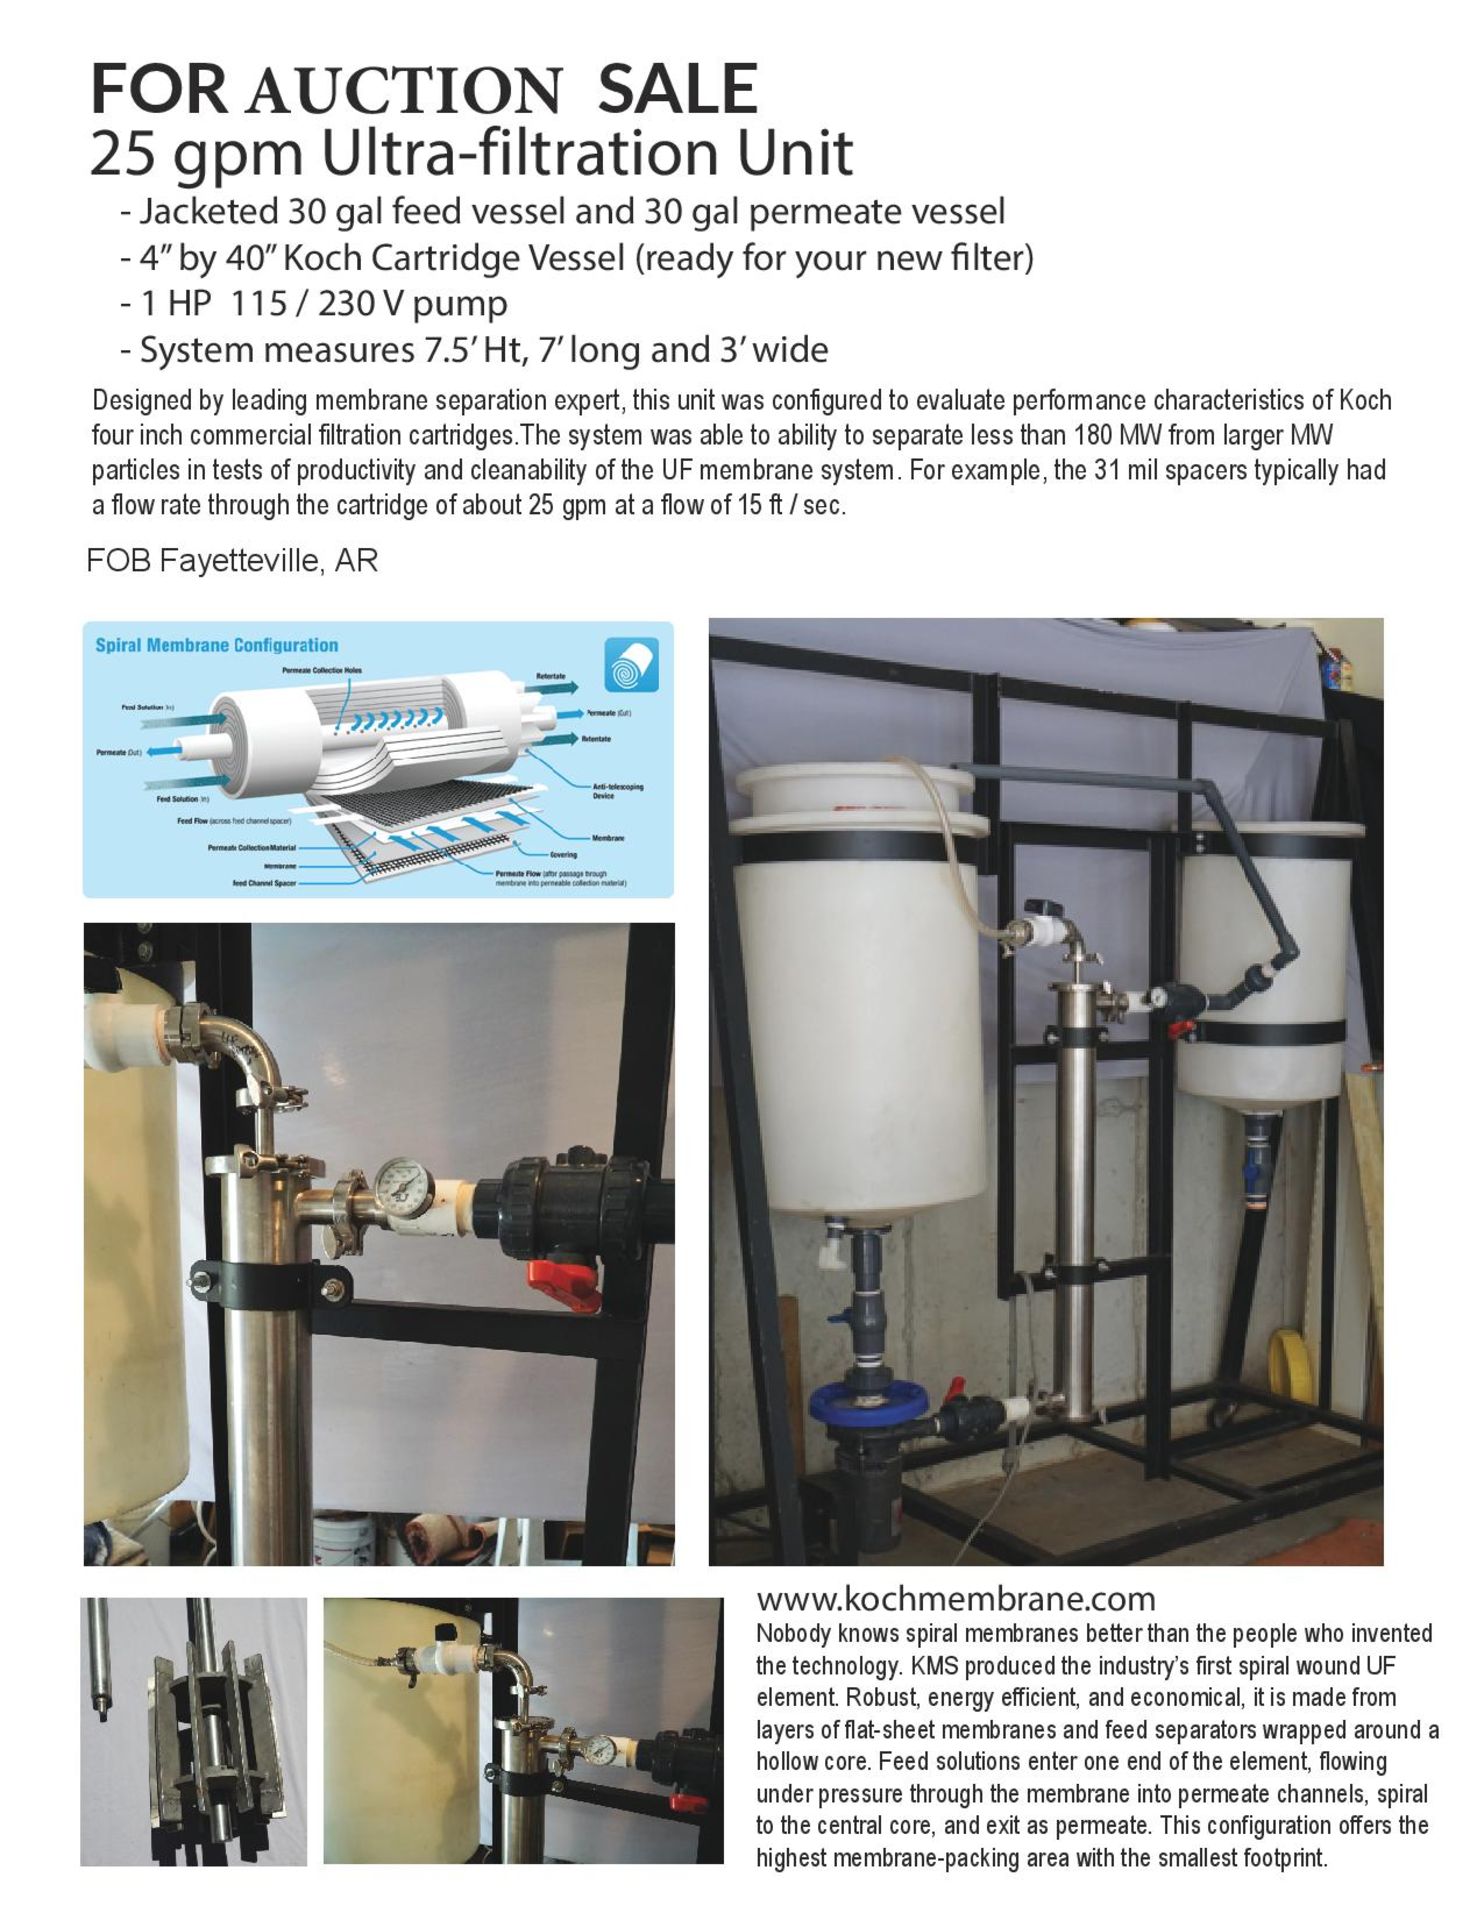 Ultra Filtration System - Unitized. 25GPM. Consisting of two 30gal vessels, a 1hp 115/230v